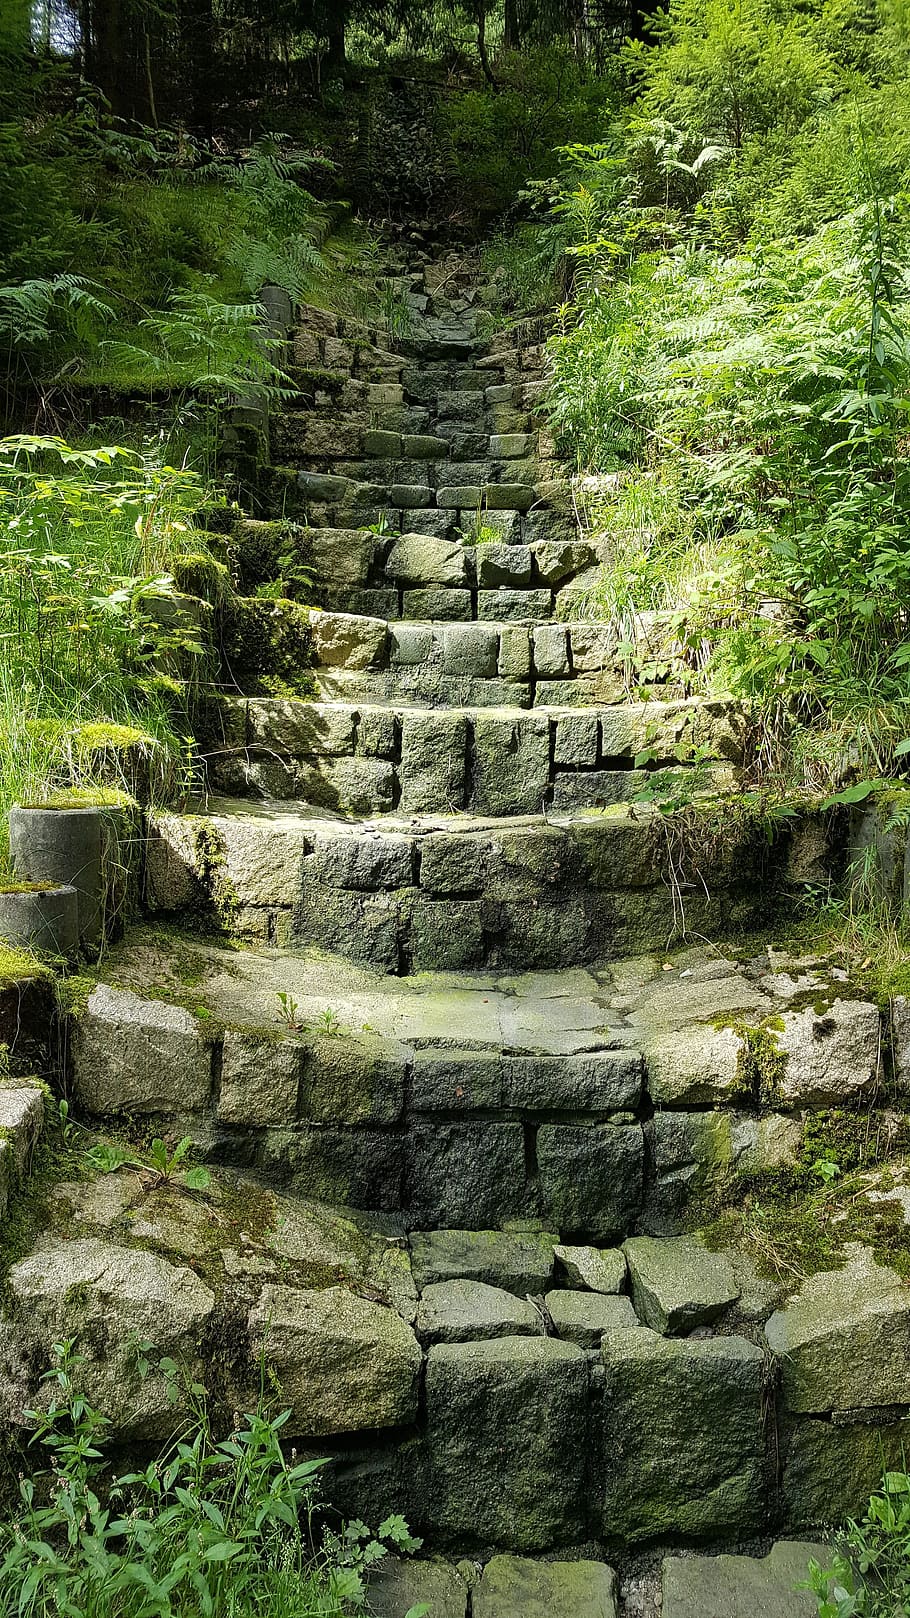 Stairs, Stone, Stairway, Hiking, stone stairway, gradually, rise, forest, nature, forest path